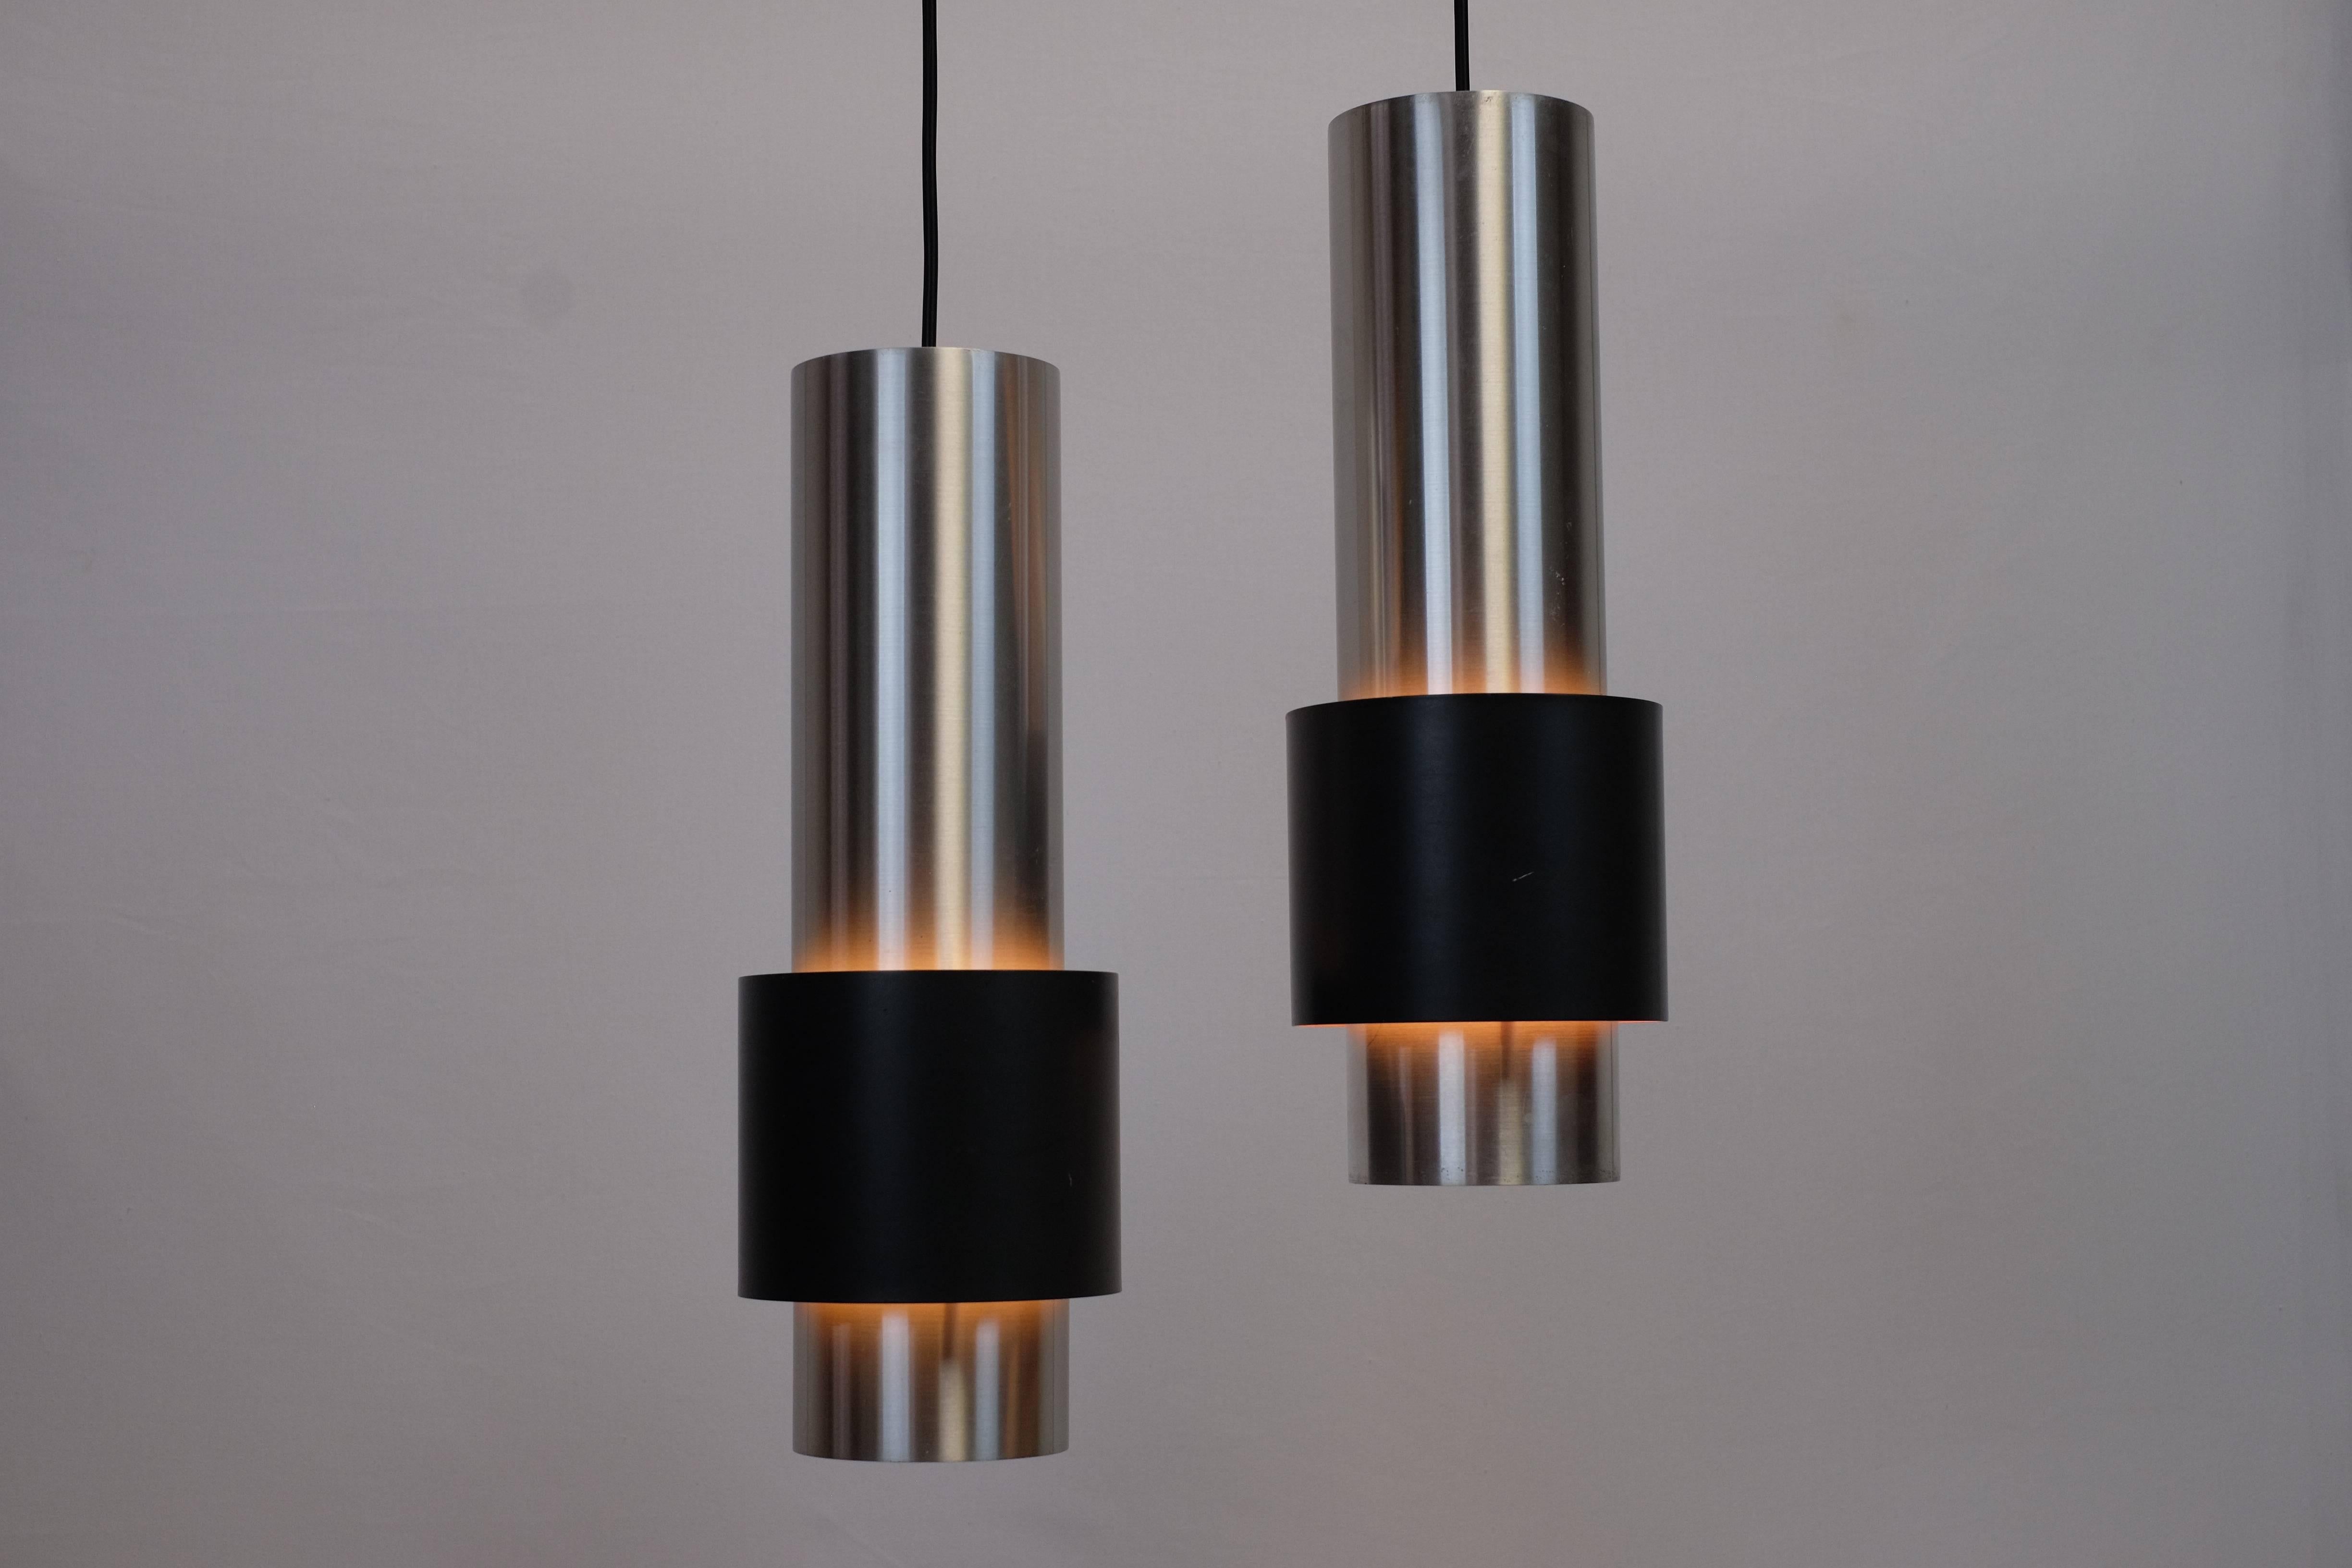 These stunning pendant lamps, model Zenith, was designed by Jo Hammerborg and produced by the Danish manufacturer Fog & Mørup in 1967. The lamps is made from aluminium with the outer cylinder painted in a matte anthracite color. The inside of this